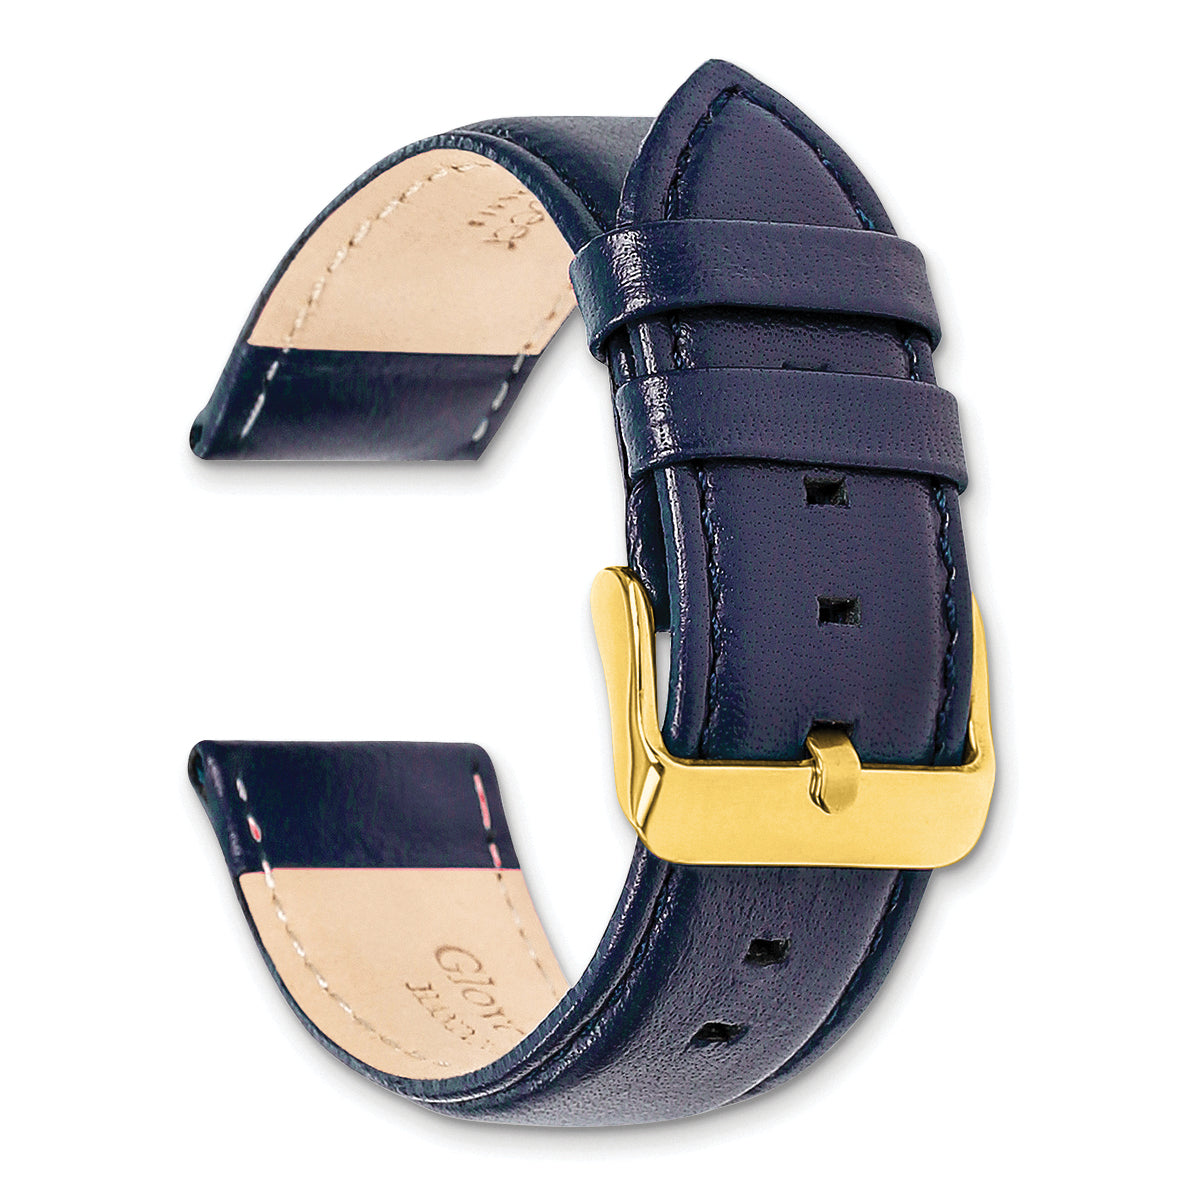 14mm Navy Glove Leather with Gold-tone Panerai Style Buckle 6.75 inch Watch Band